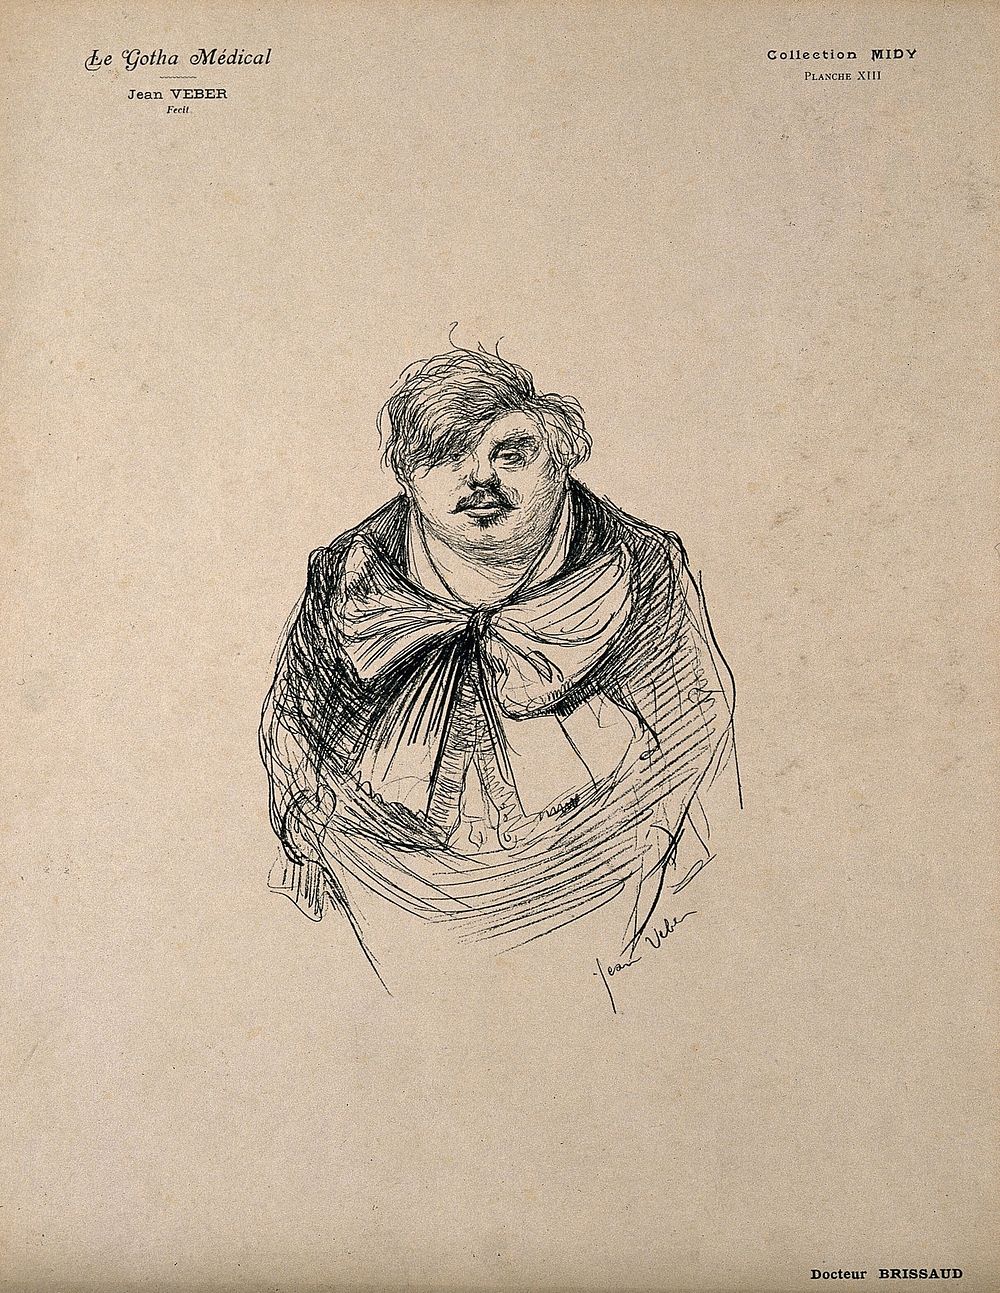 Edouard Brissaud. Reproduction of drawing [] by J. Veber.